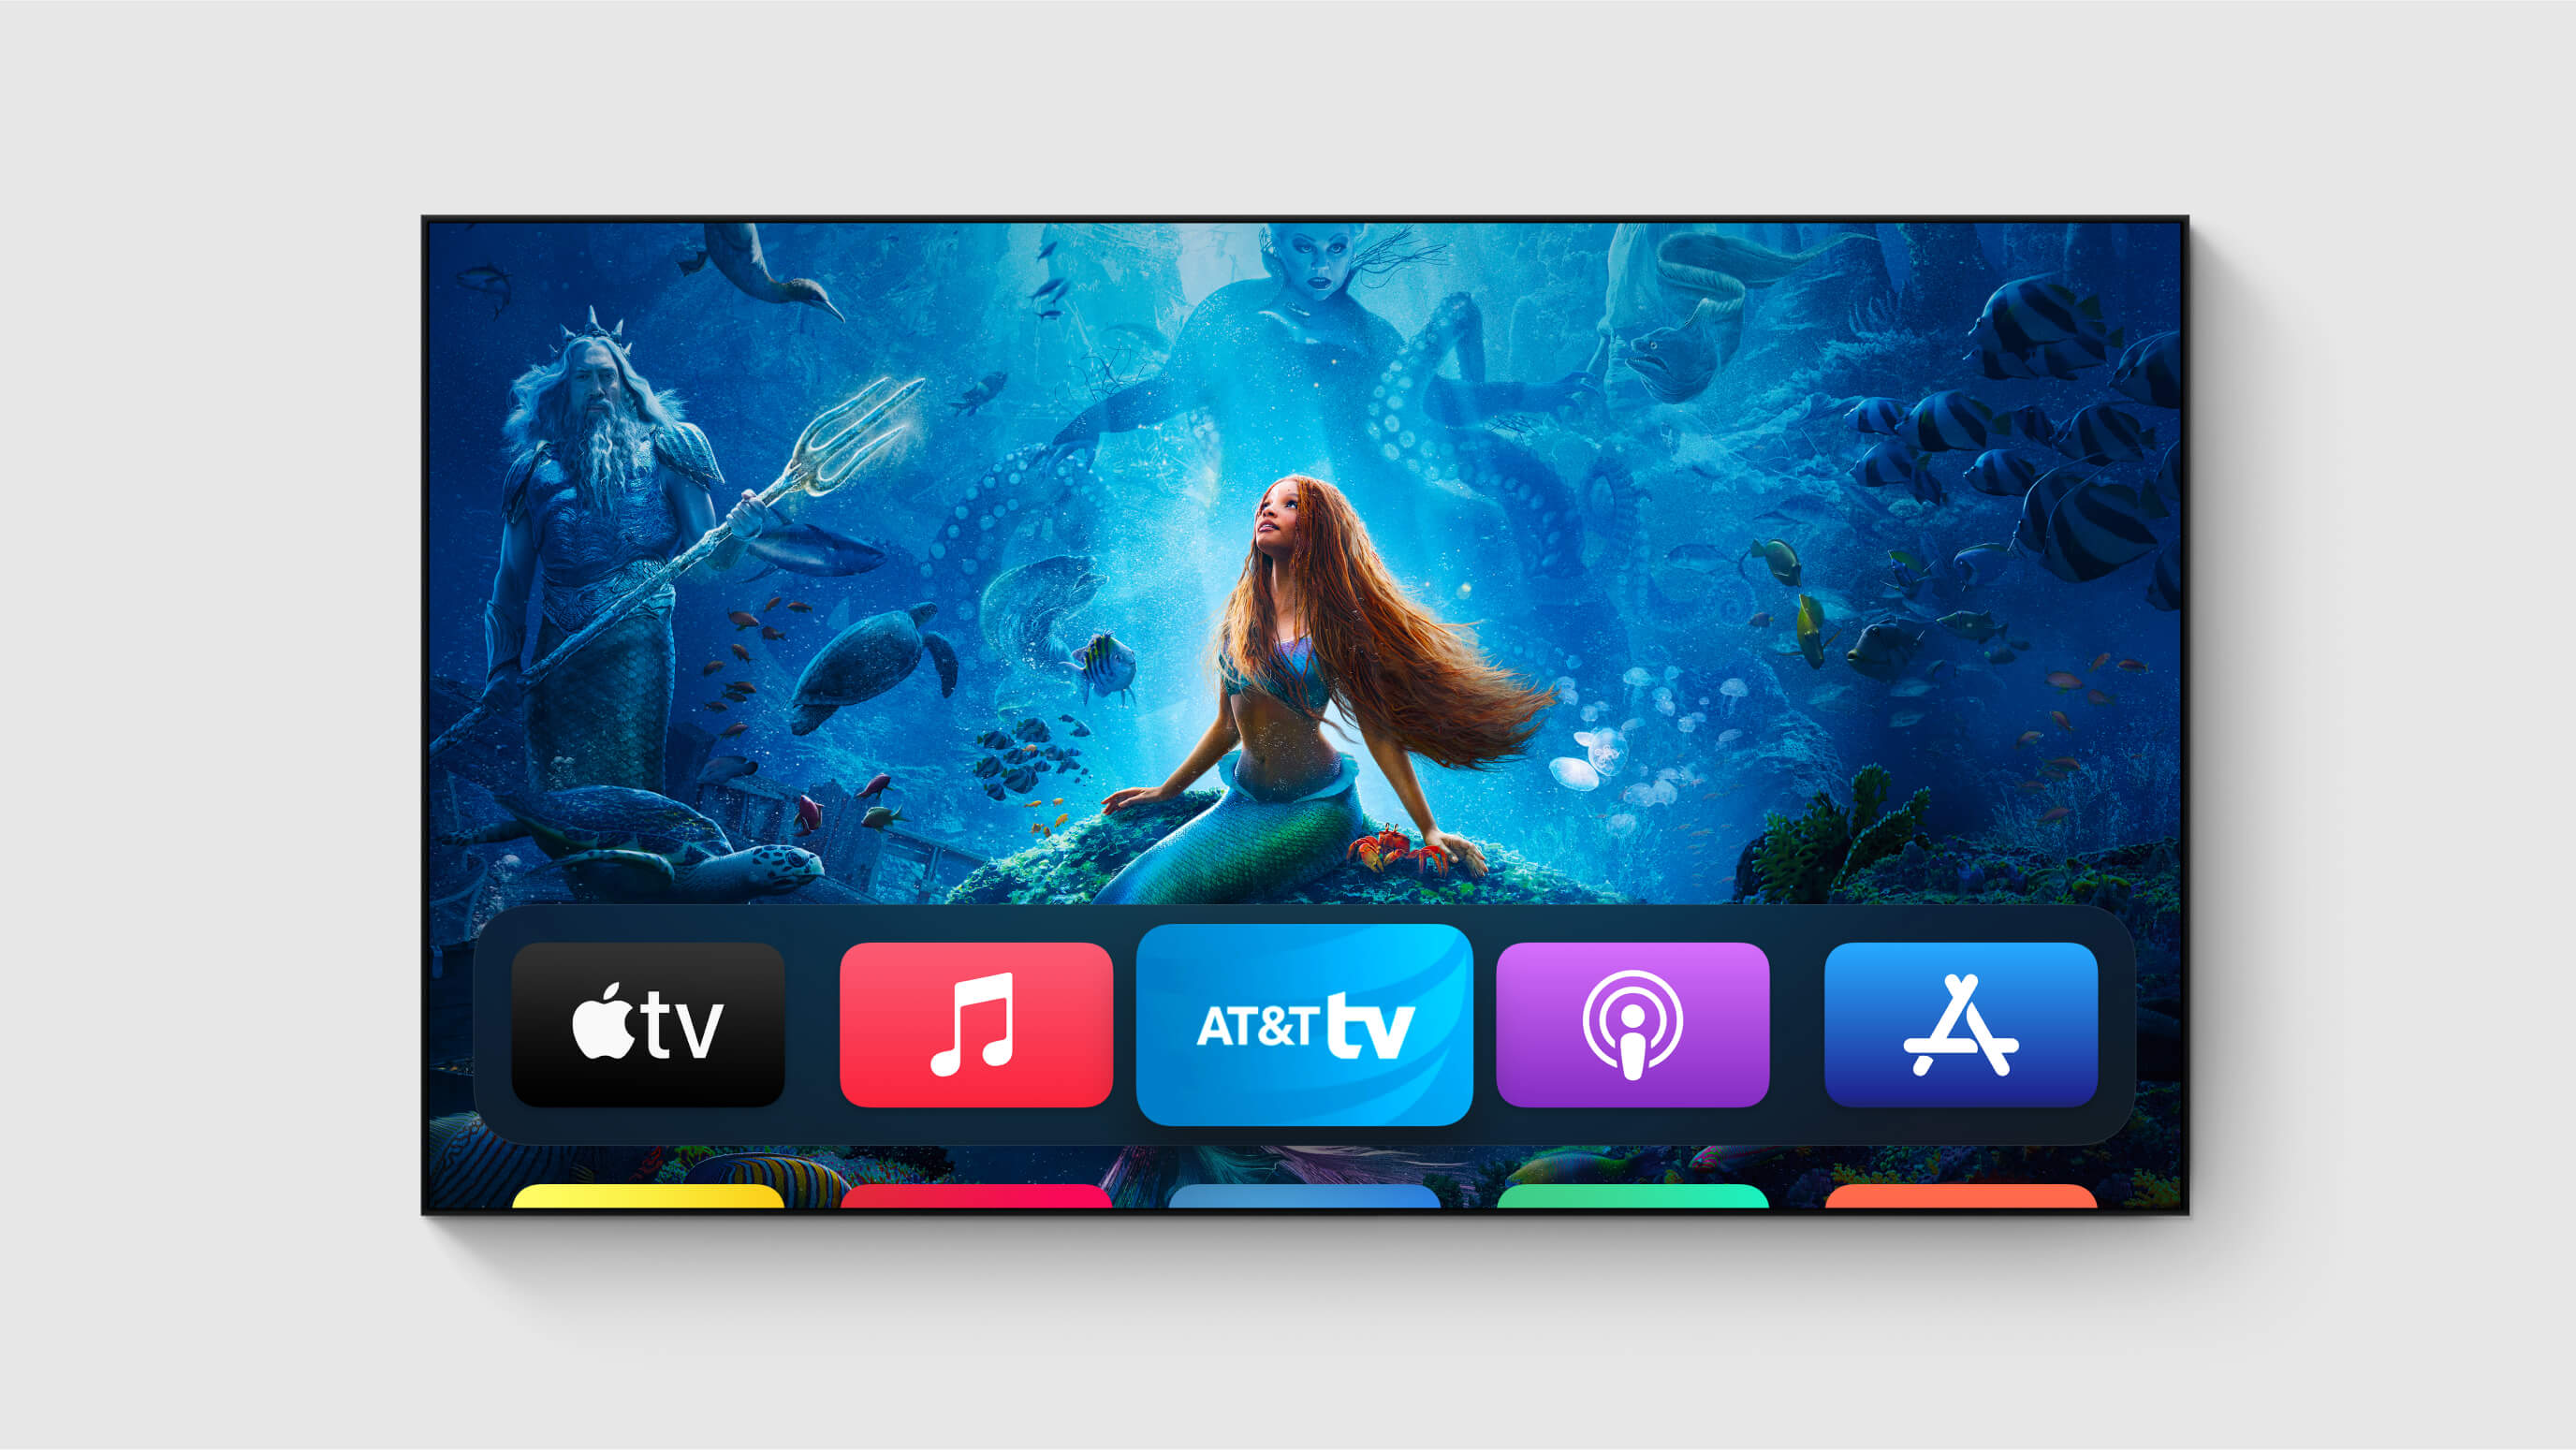 icons-atttv-1376px-2x-1